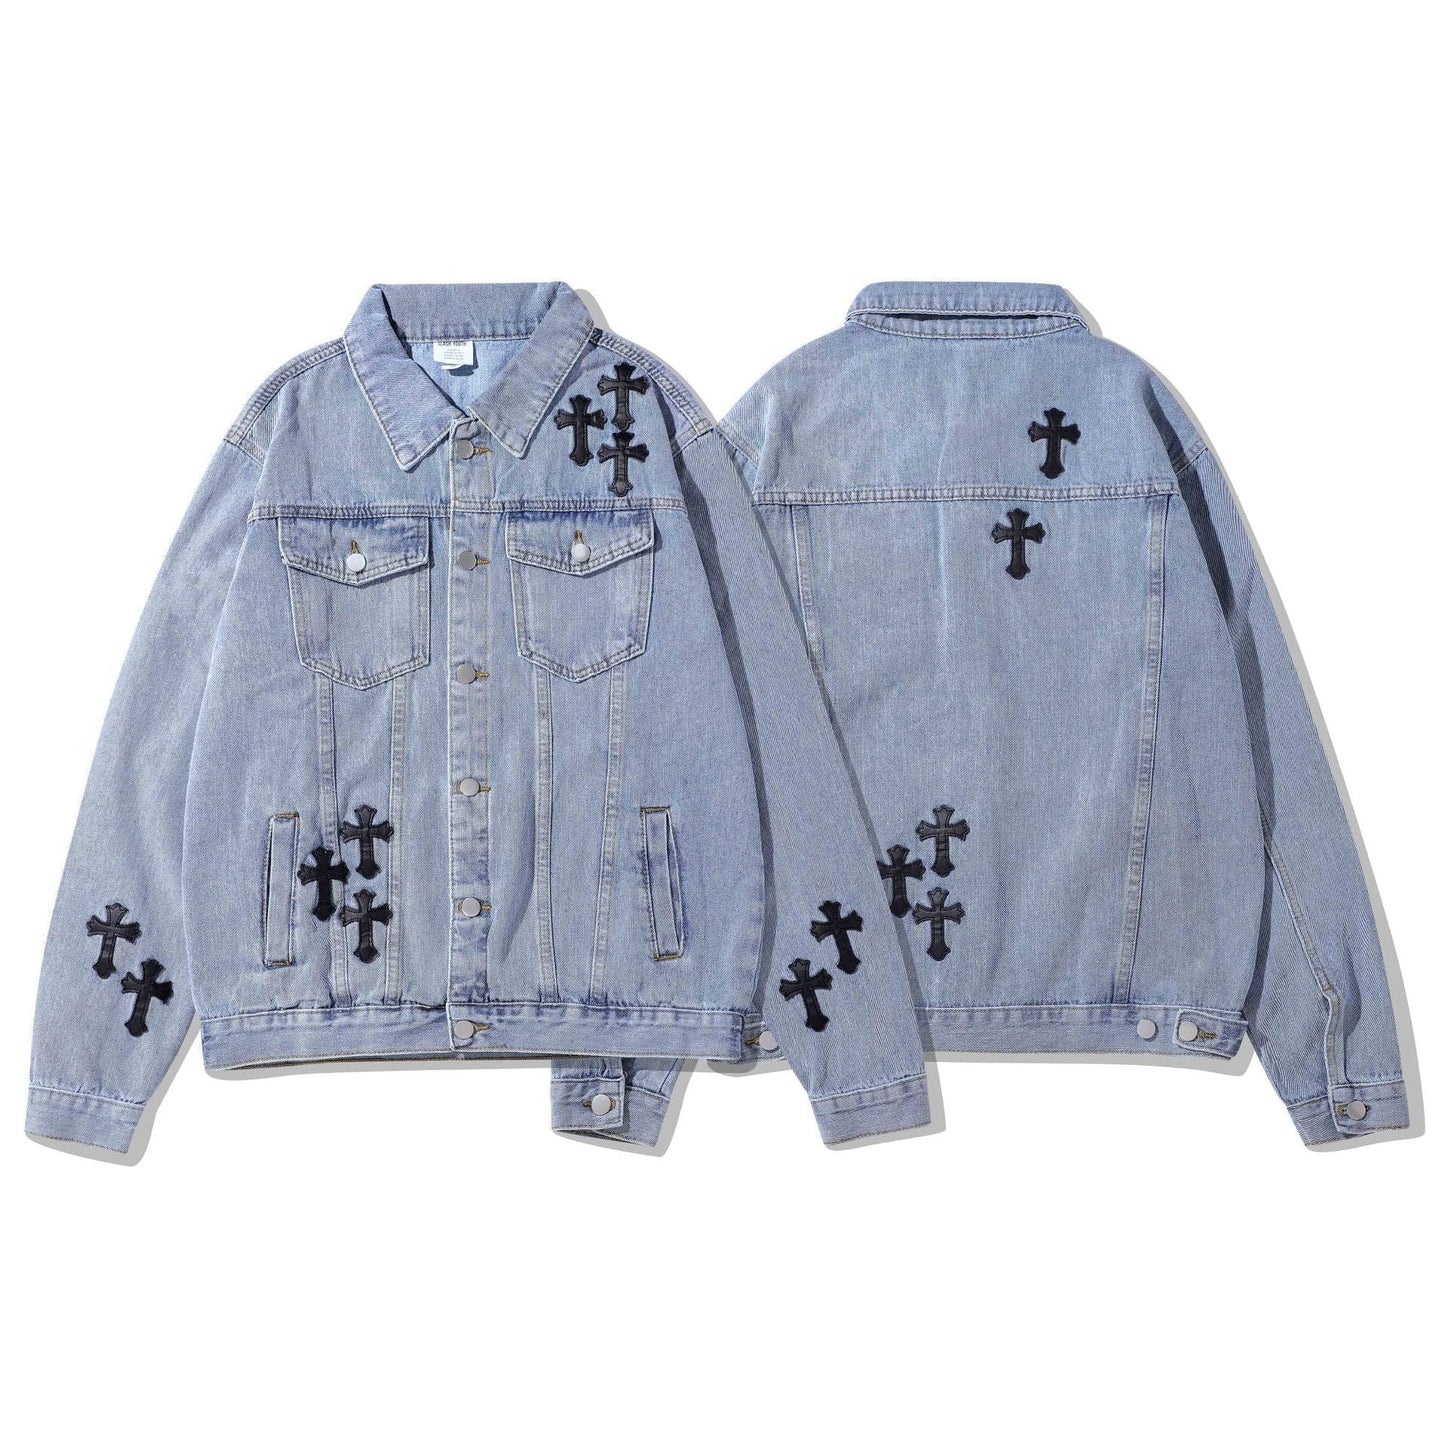 High Street Leather Embroidery Cross Old Denim Jacket Blue s112 L